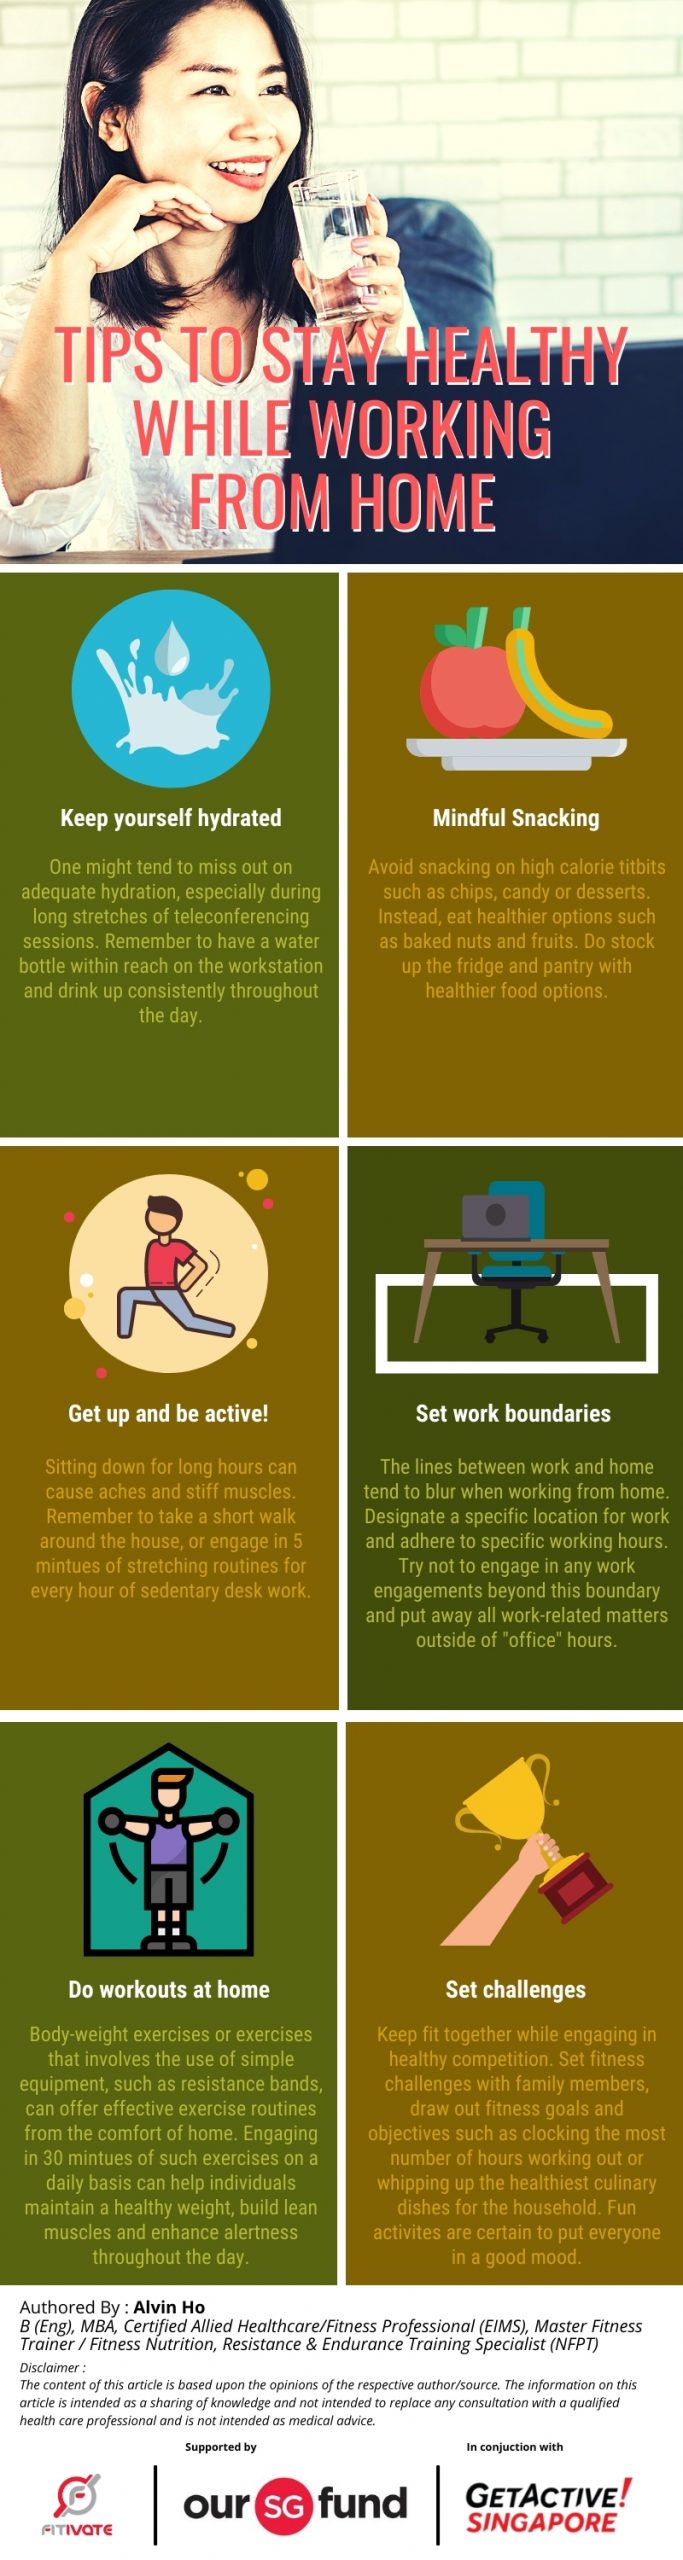 Tips for Staying Active and Maintaining Fitness Routine while Working from Home